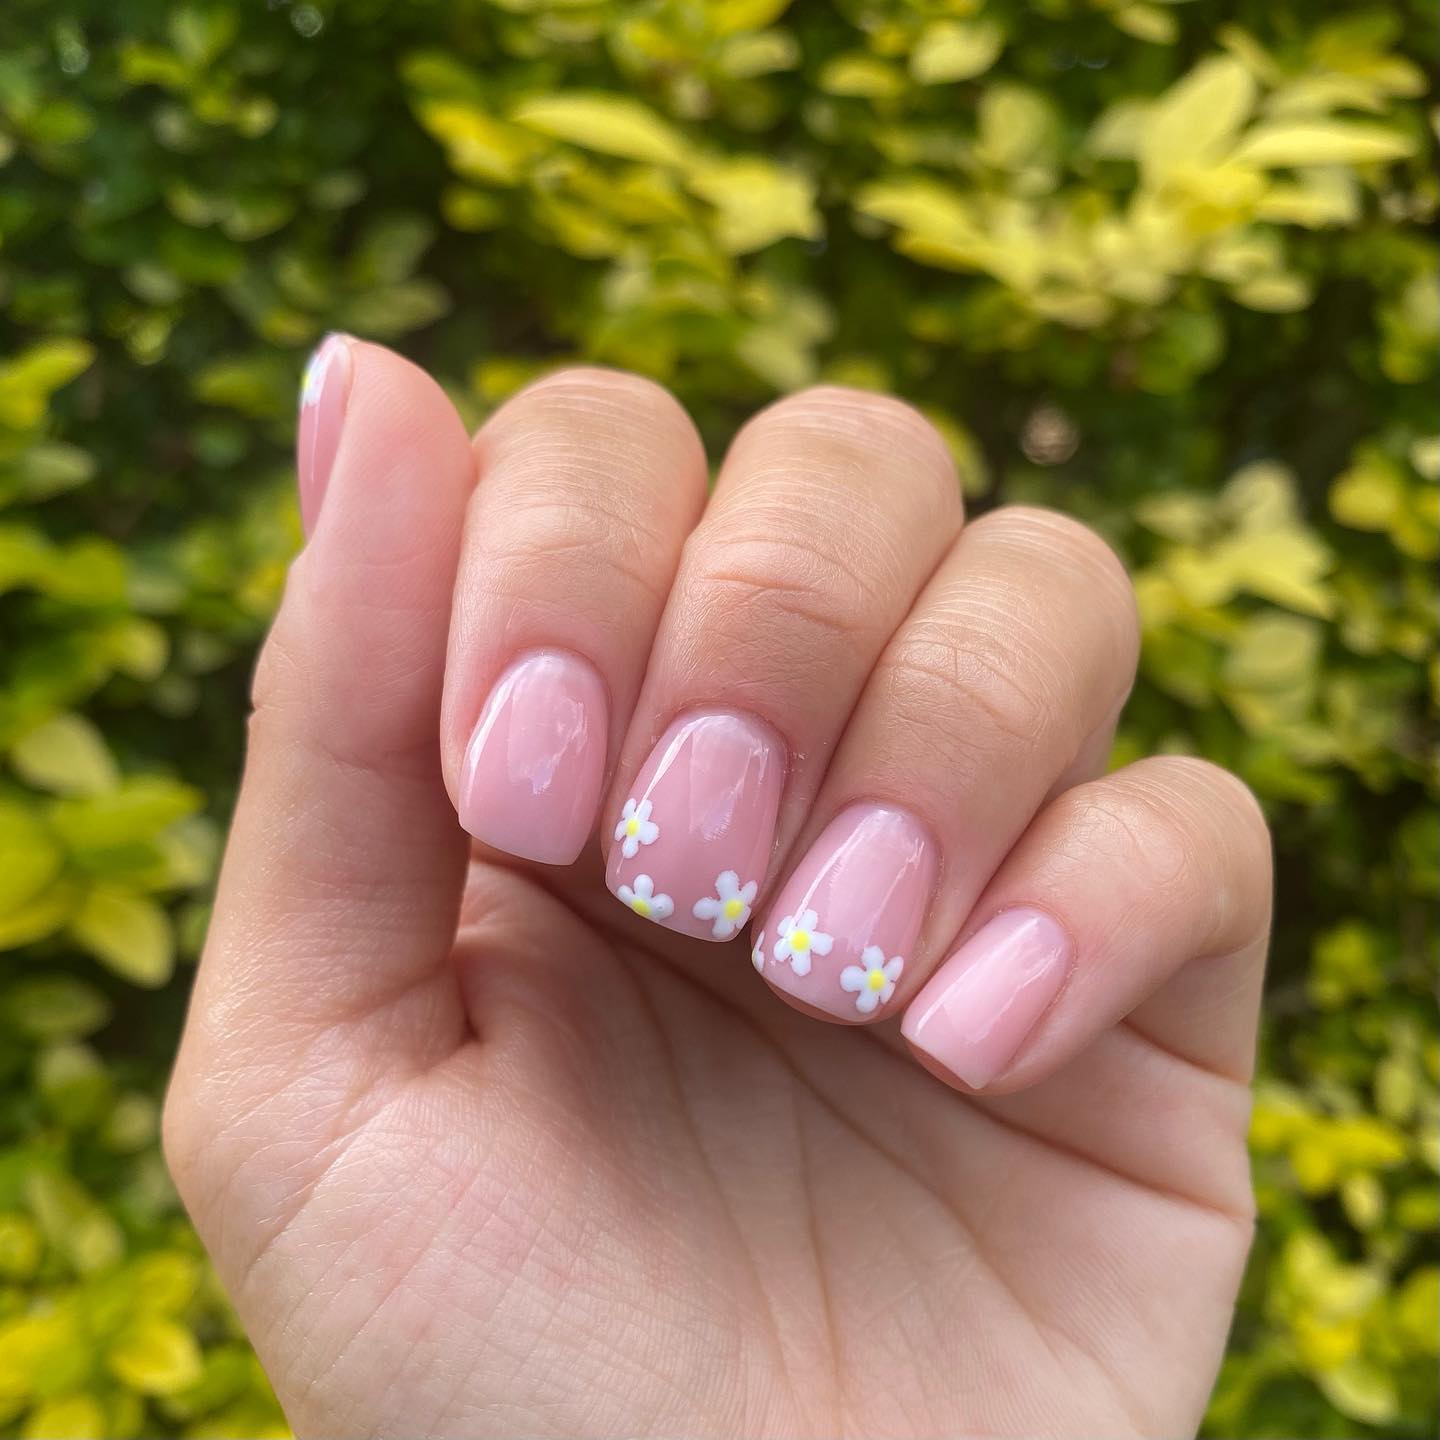 It is hard to get over how adorable these nails are! By having simple and chic nails, everyone will notice your gorgeous manicure.